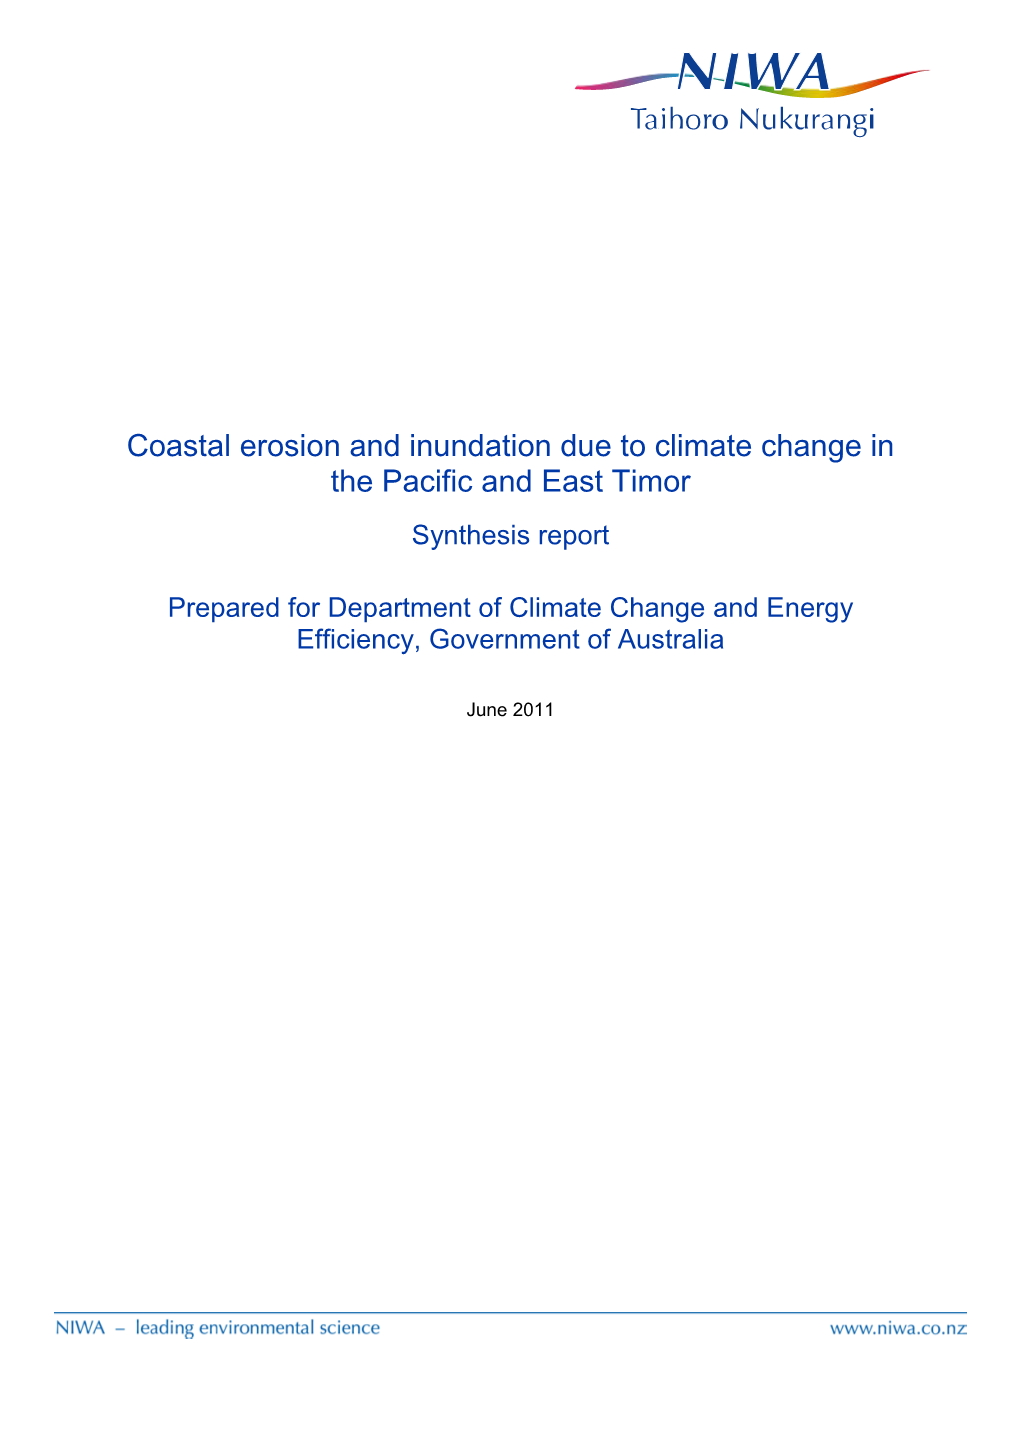 Coastal Erosion and Inundation Due to Climate Change in the Pacific and East Timor Synthesis Report